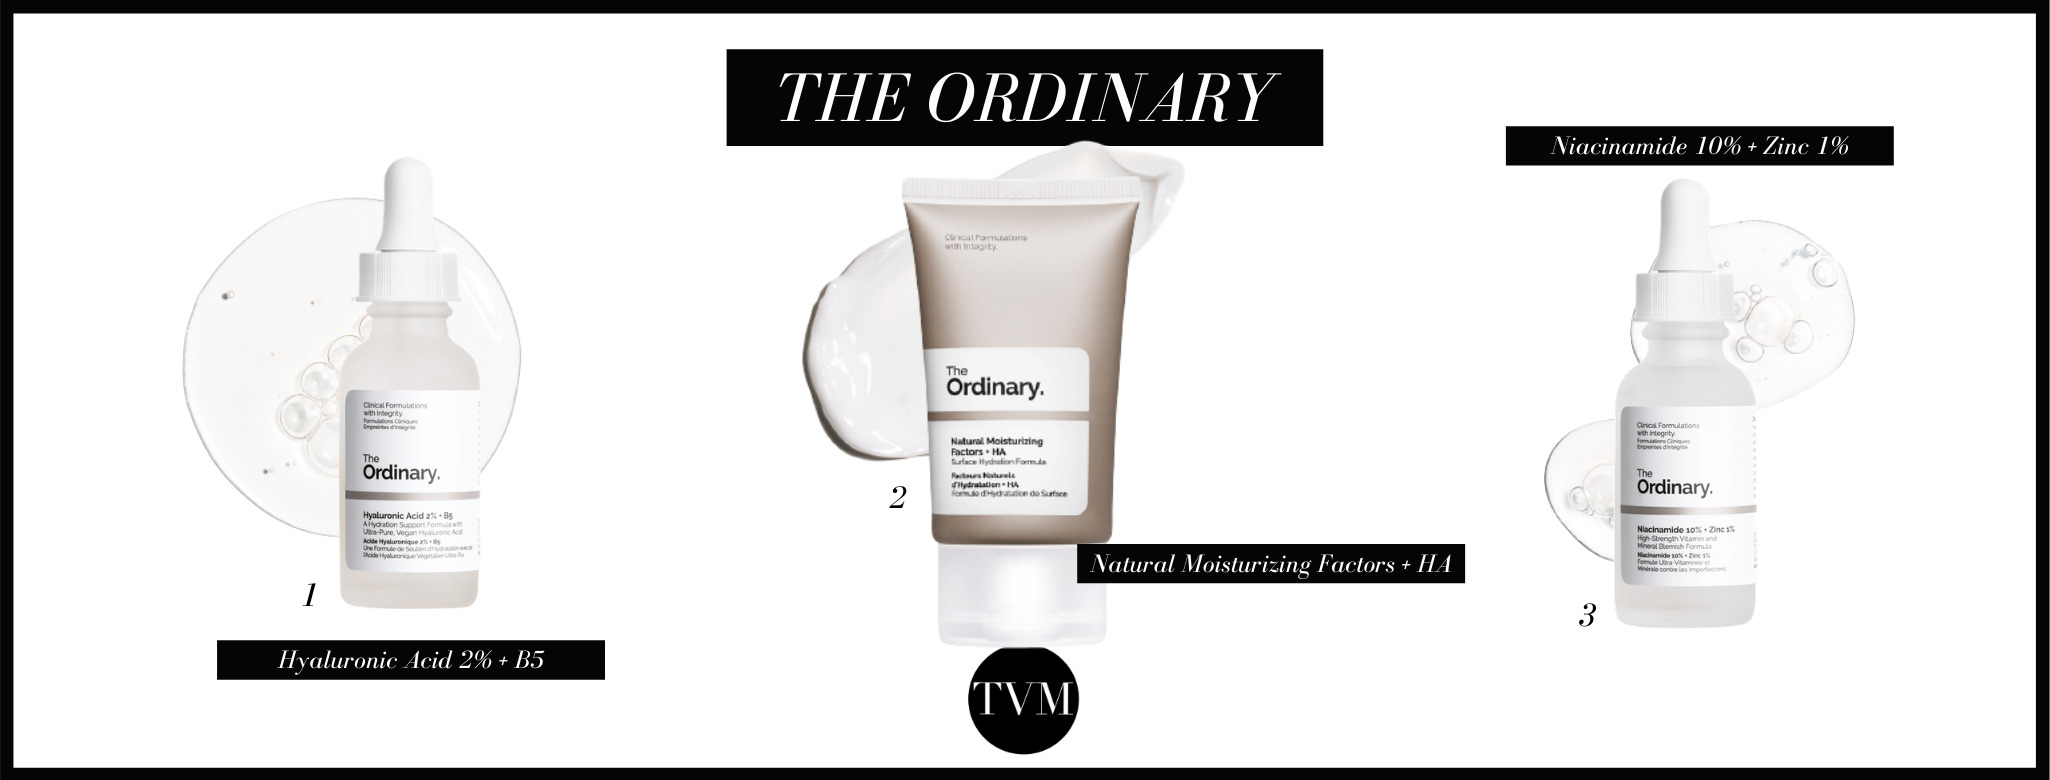 The Ordinary is a brand that we have mention several times in our articles. We love their products and how affordable they are. The Ordinary is part of Deciem. This company has a very transparent policy regarding its products and sustainability.  As of today, all their products are 100% vegan and cruelty-free. Although these brands are not sustainable yet, they have come a long way to achieve that end goal. Deciem states they have initiatives to minimize their recycling and waste disposal in their office and stores. Plus - they offer an in-store recycling program.